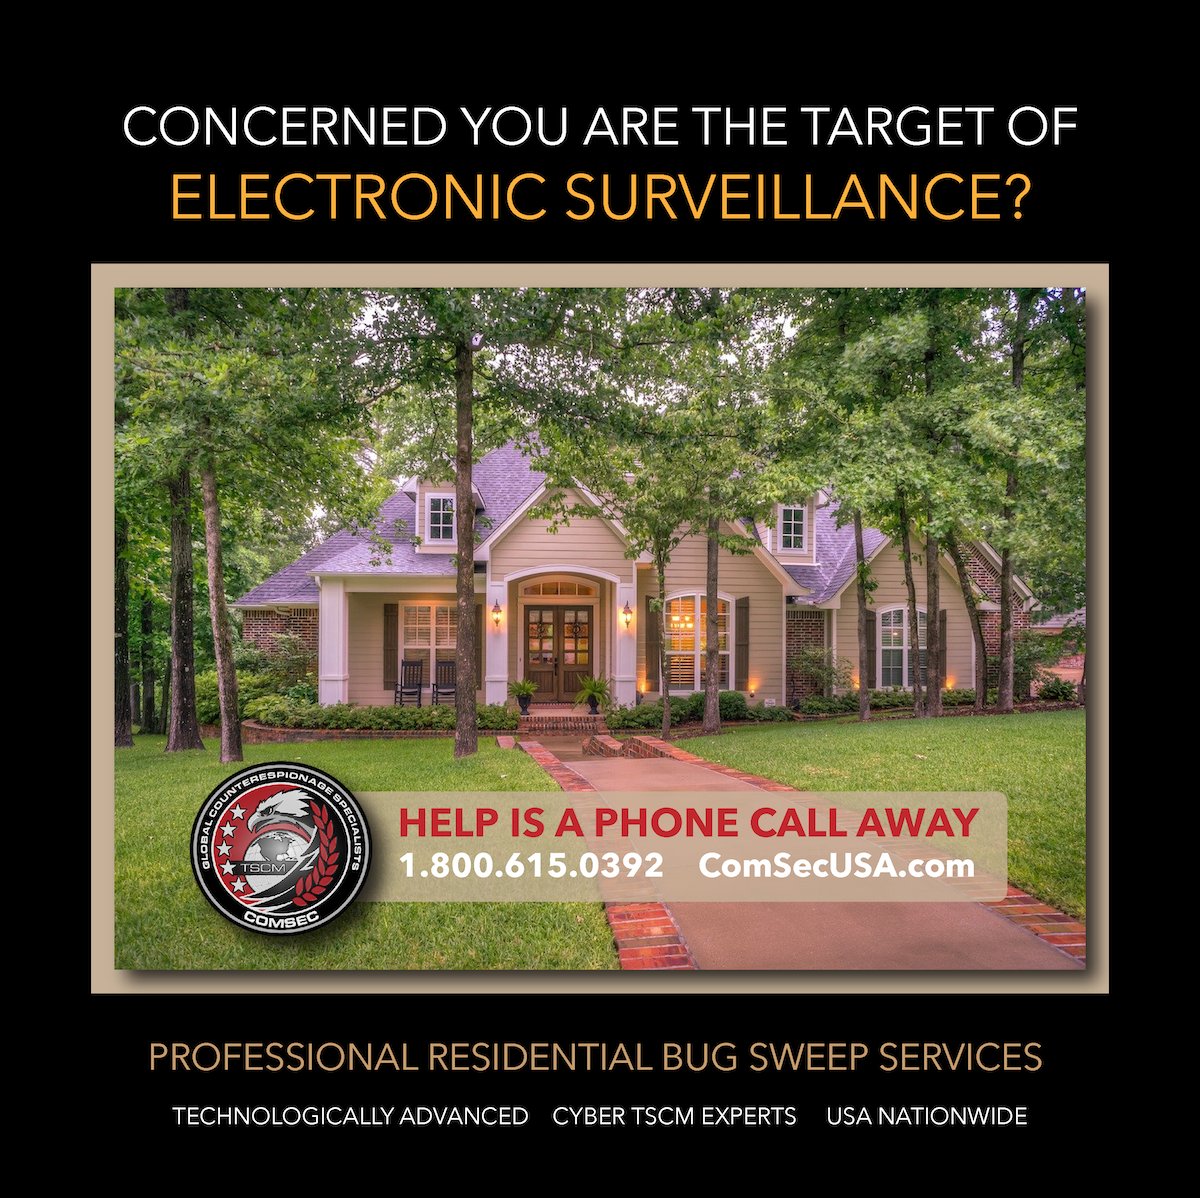 Executives BEWARE! Your Home May Be Targeted By Spies Who Think It's Easier to Steal Info From Your Home Versus The Office. Learn More About Our Residential Services: tinyurl.com/4jz6x7hm #ElectronicPrivacy #surveillance #business #riskmanagement #ExecutiveProtection